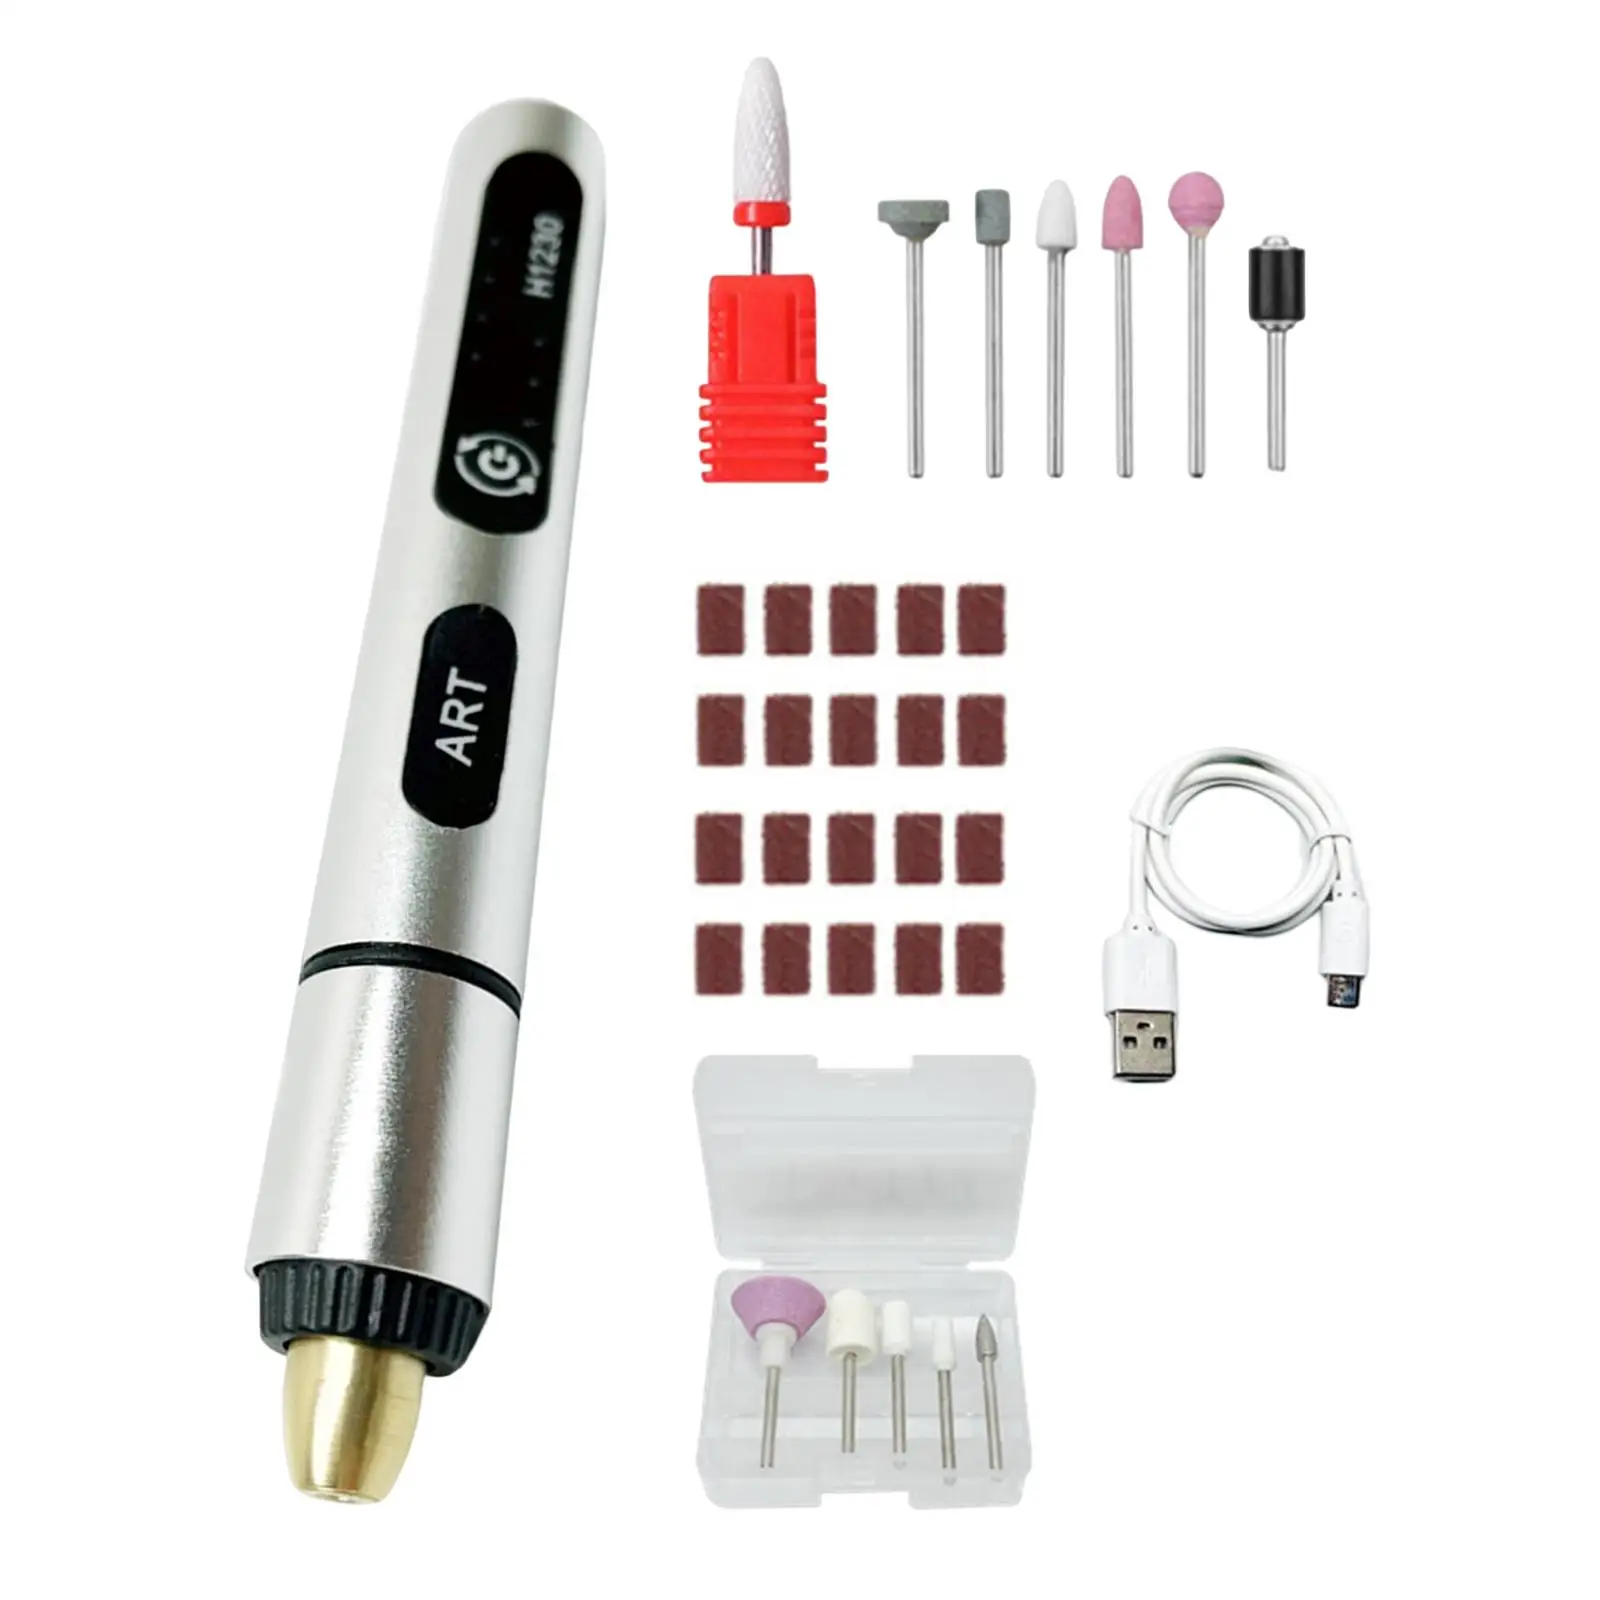 Electric Nail File Drill Kit USB Charging Pedicure Manicure Pen Sander Polisher Mini DIY Engraving Tool Kit for Crafts Etching